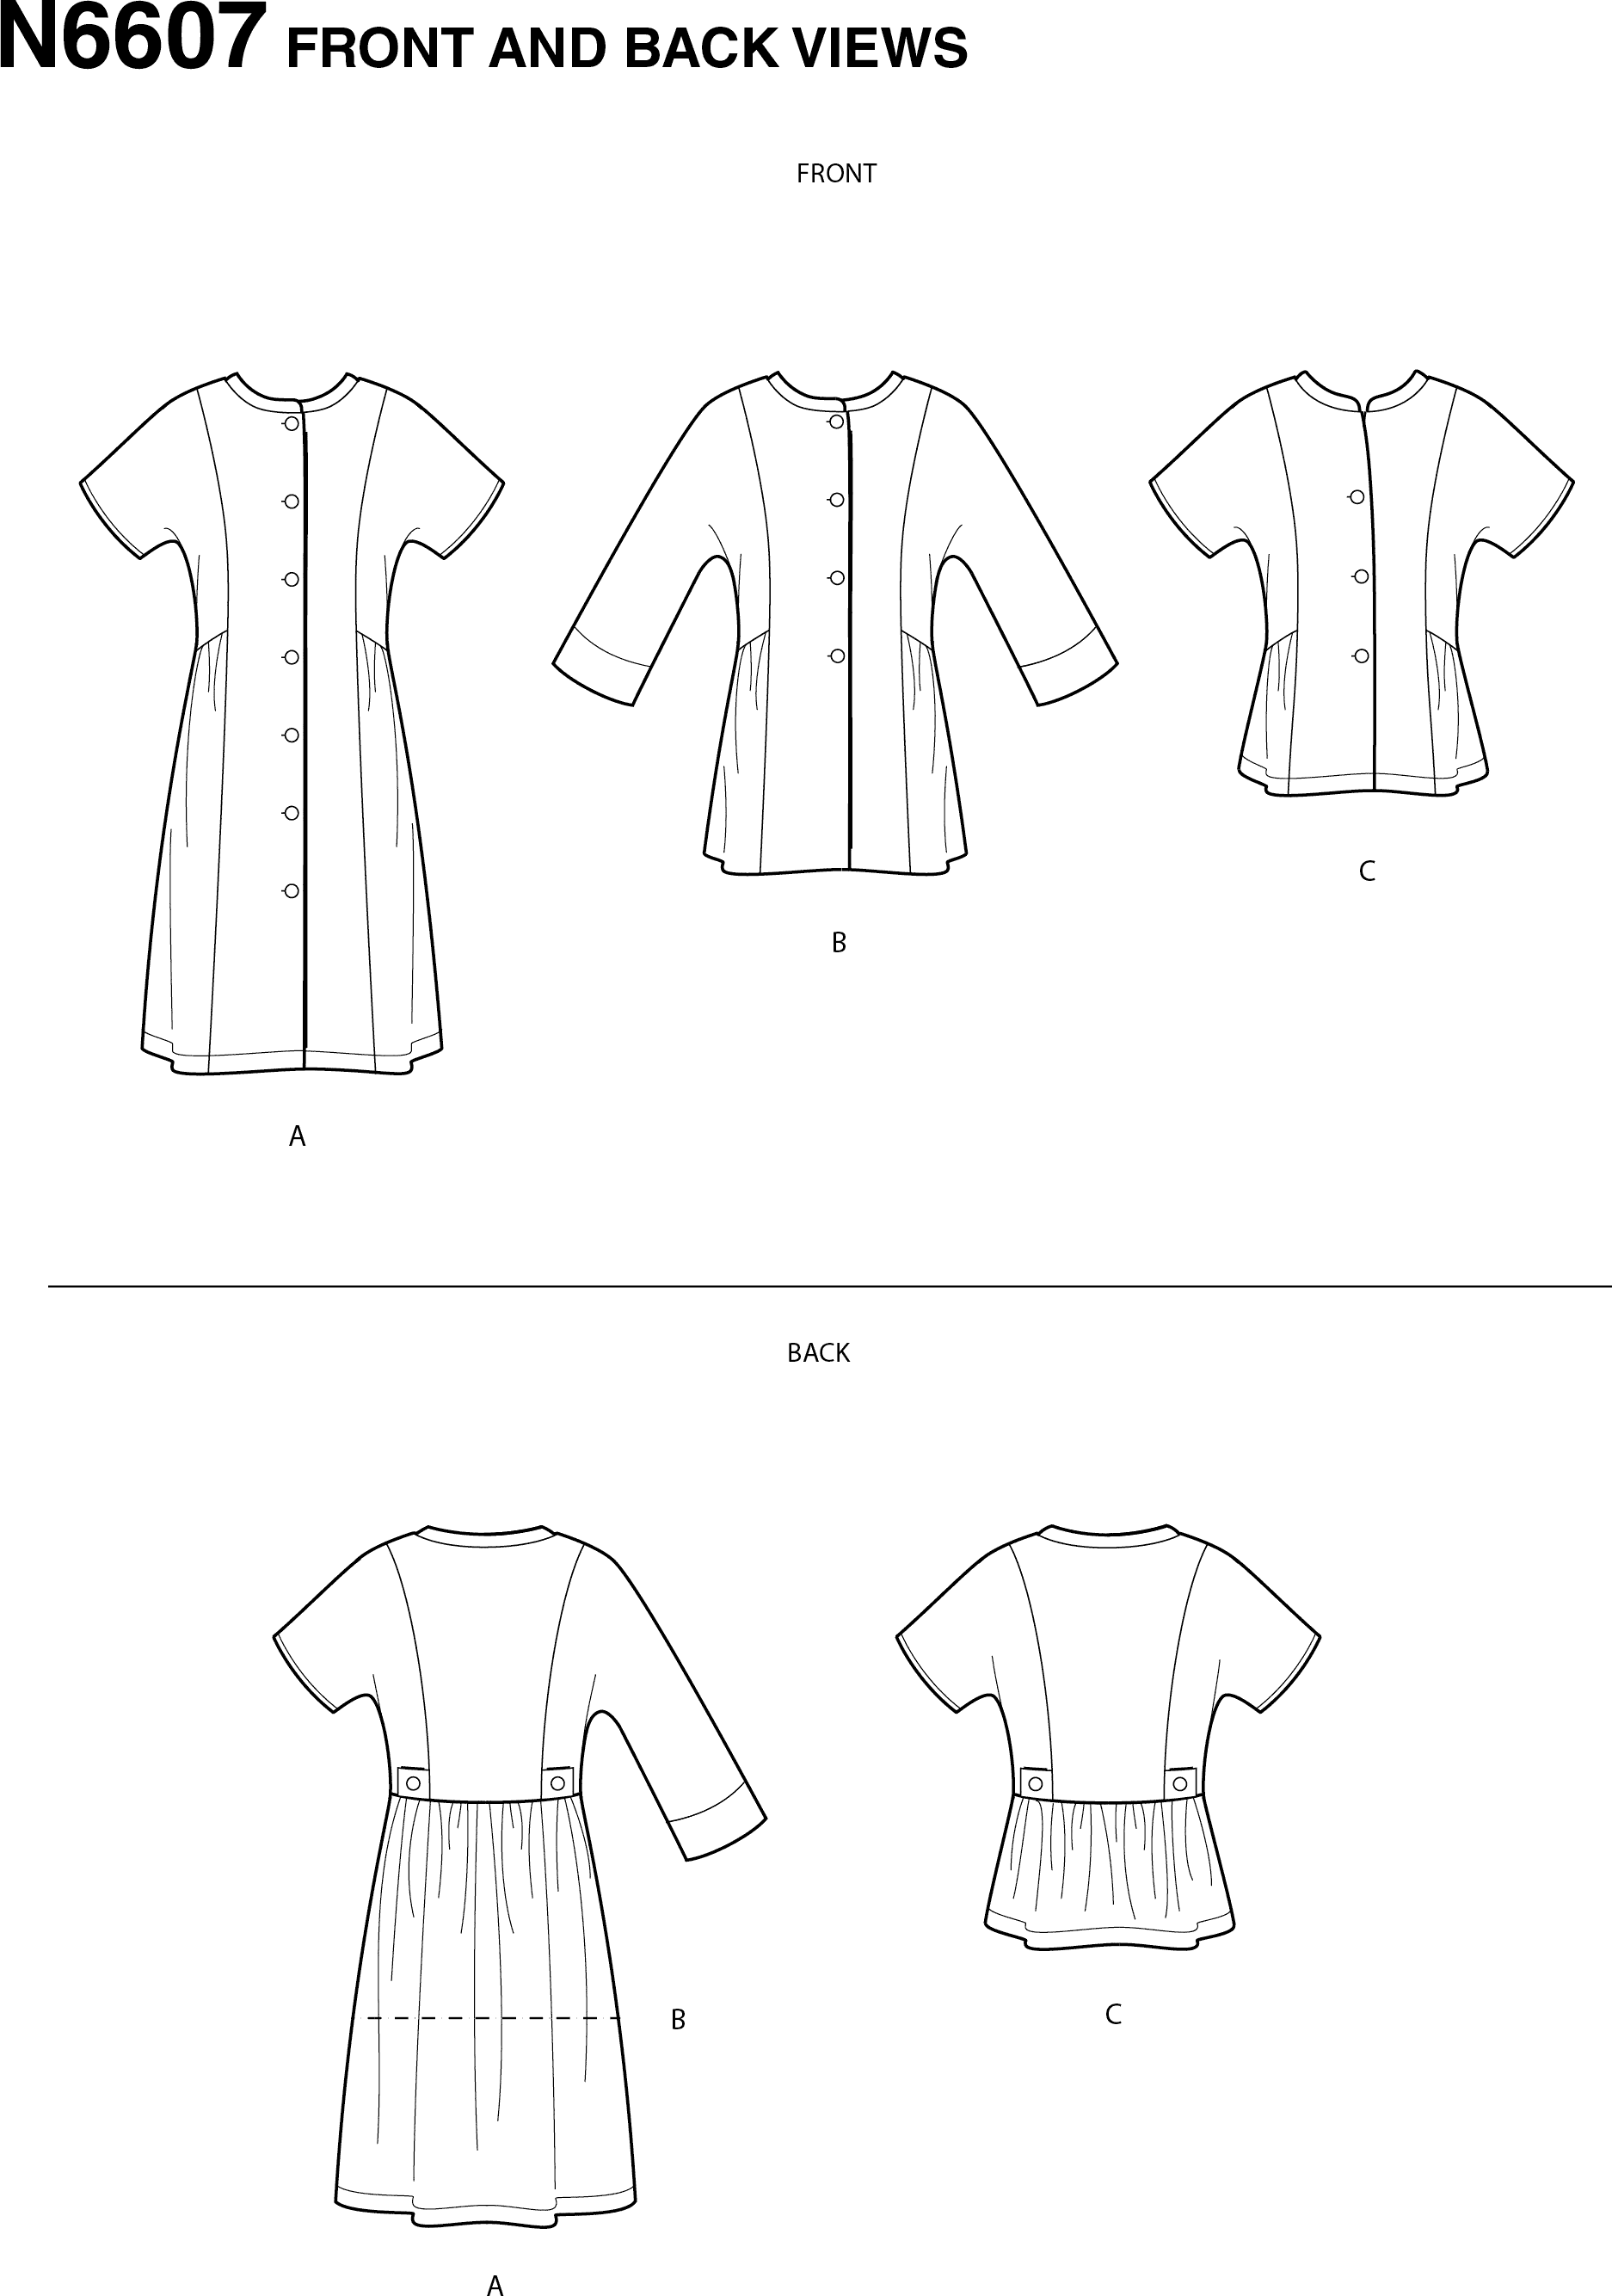 New Look Sewing Pattern N6607 Misses Mini Dress Tunic and Top 6607 Line Art From Patternsandplains.com